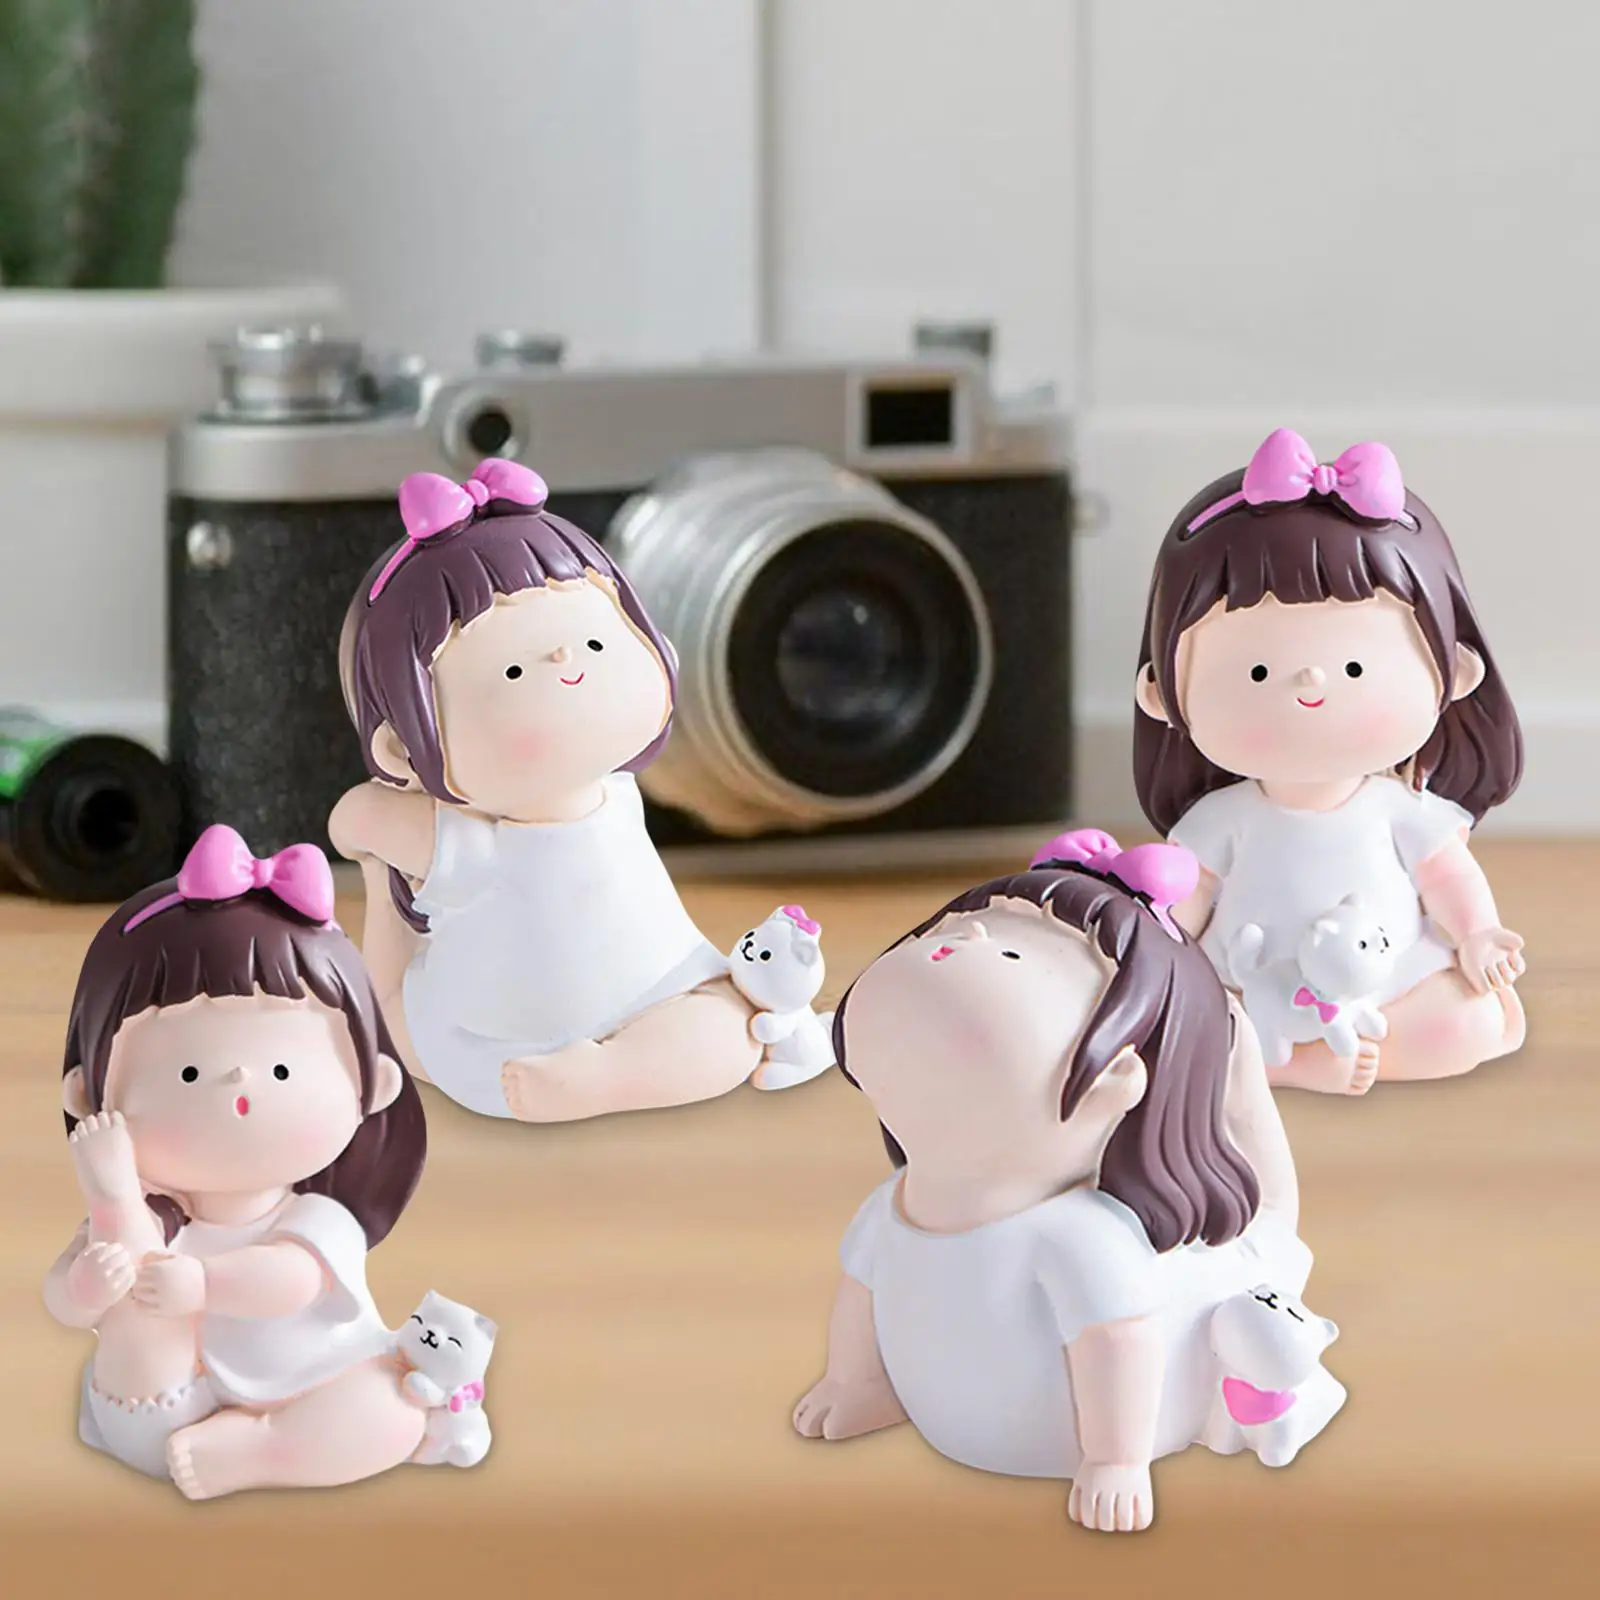 Lovely Girl Yoga Pose Statues Sculpture Resin Crafts Figurines Office Decors